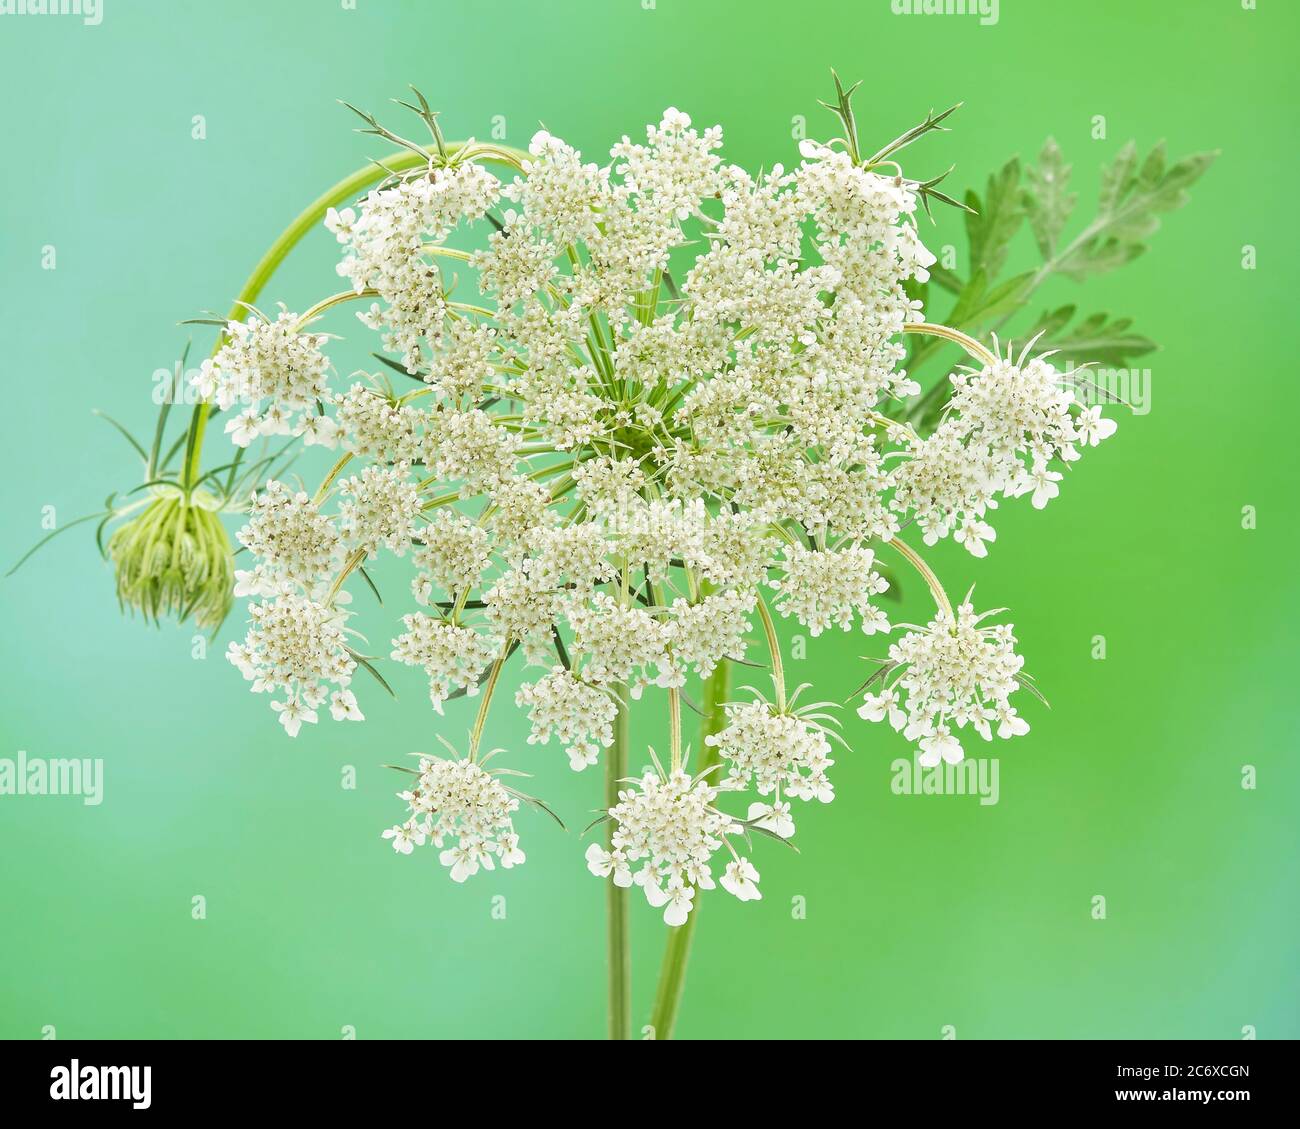 Closeup photograph of the invasive biennial herb known as Queen Annes Lace Daucus carota.  The plant smells similar to carrot and young roots are actu Stock Photo